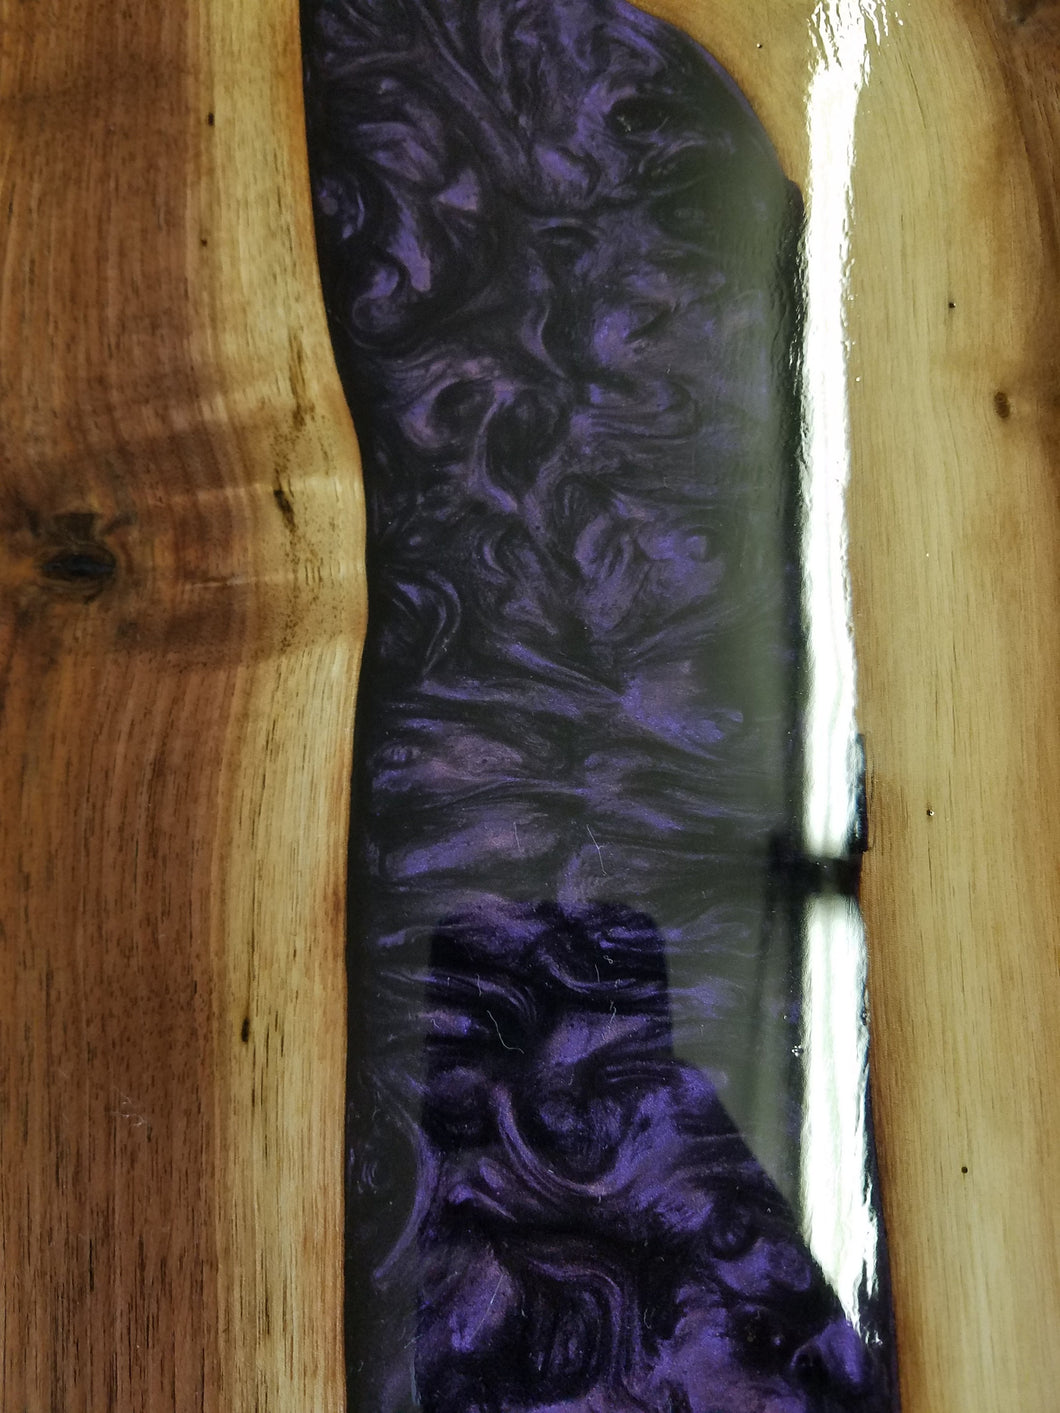 Color Fusion Deep Space - Oakbrook Wood Turning Supply